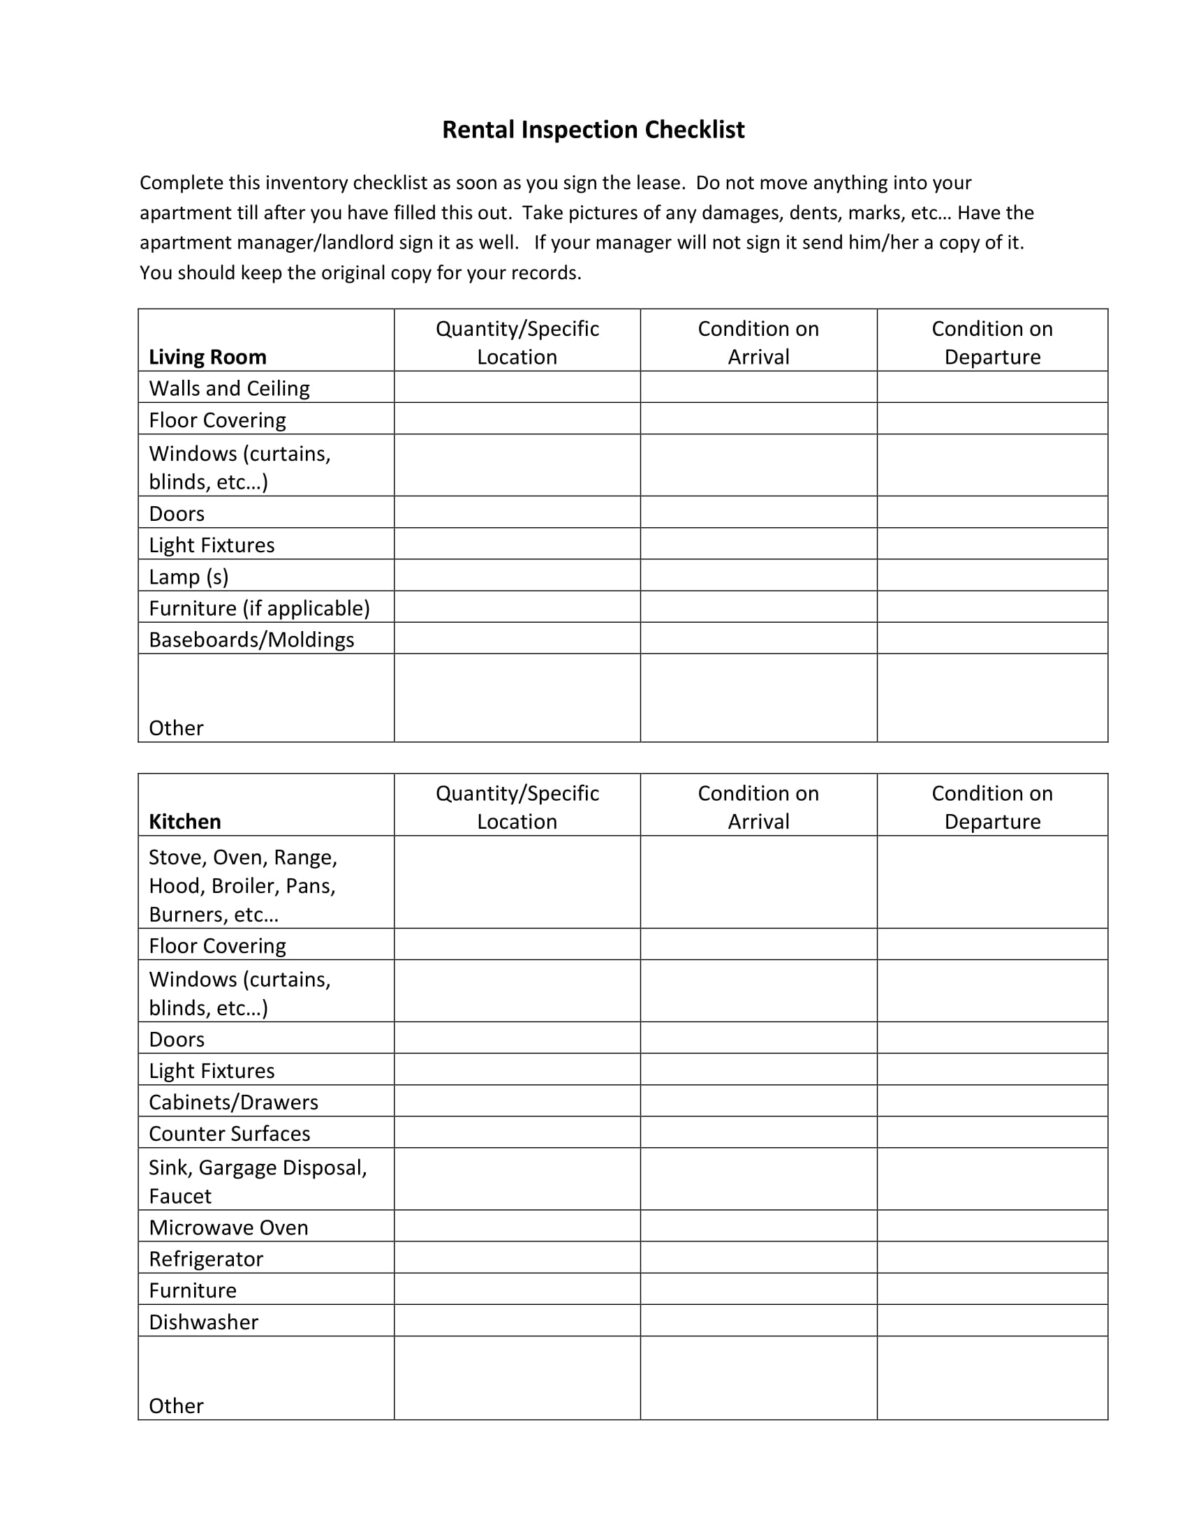 10-rental-checklist-examples-pdf-examples-for-condition-of-rental